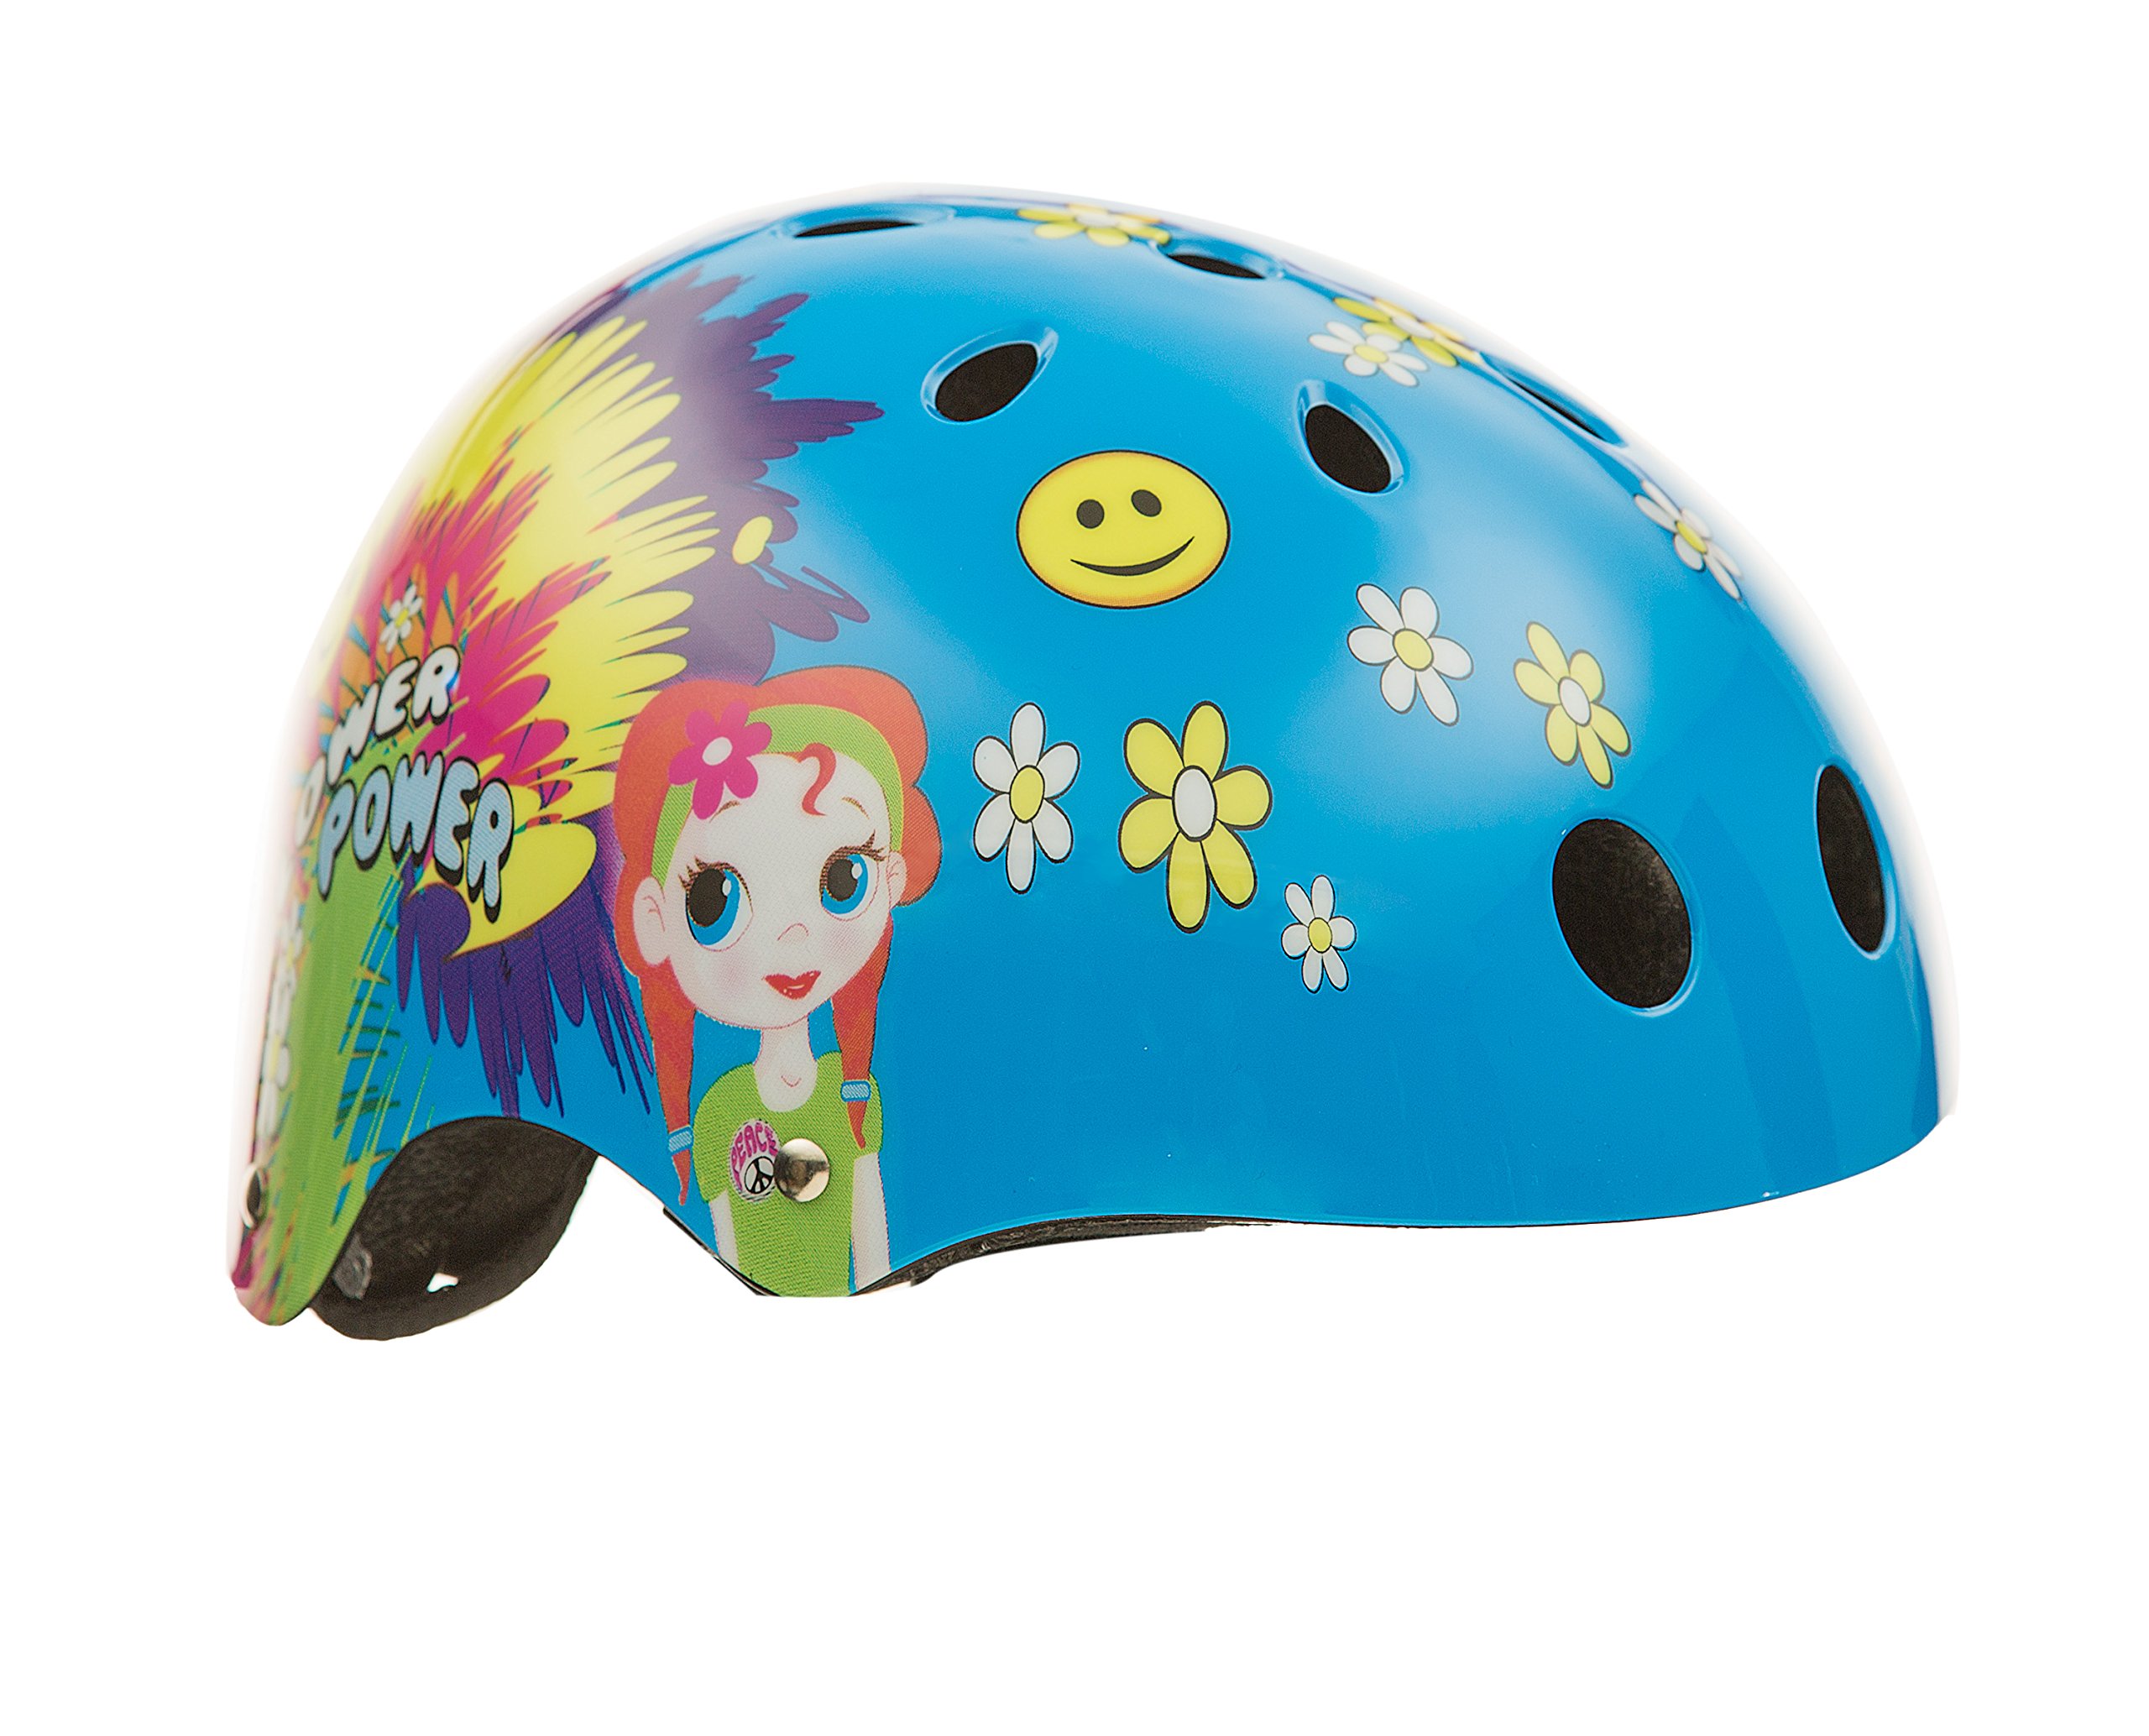 Titan Flower Power Princess 11 Vents Protective BMX and Skateboard Helmet, Kid Size Small, Age 5 and up